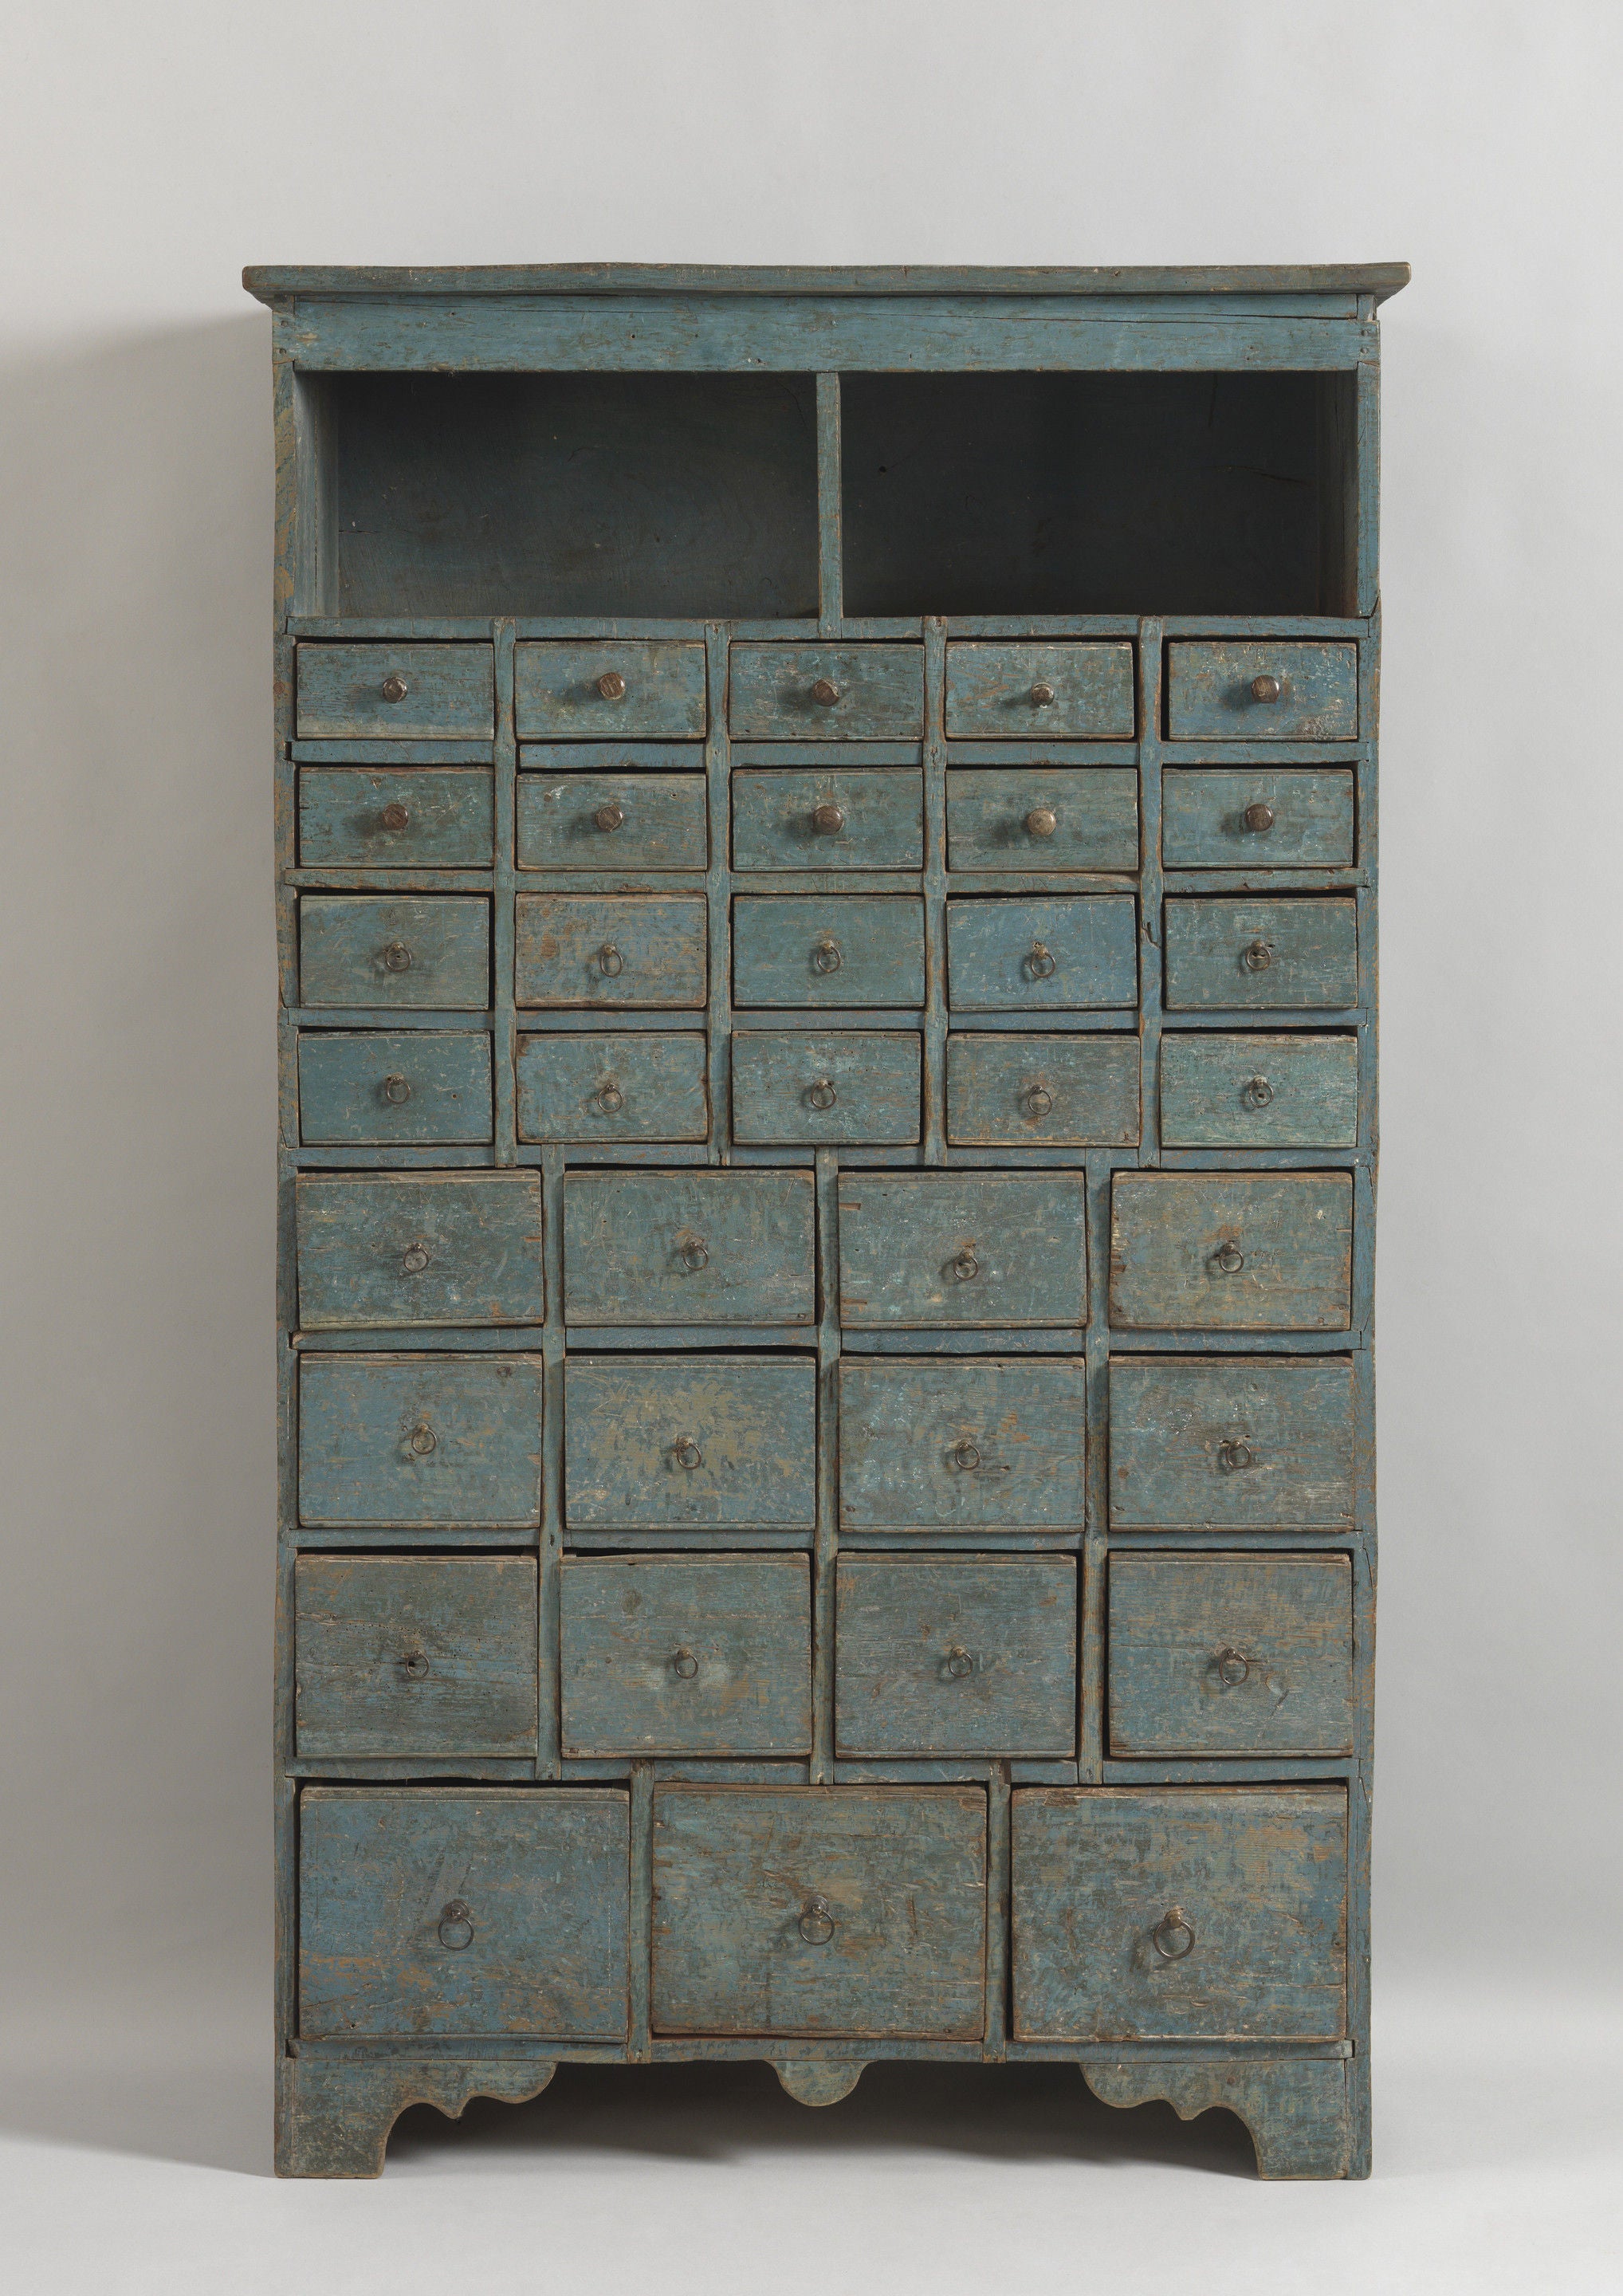 Remarkable Georgian Nest Of Thirty Five Seed Drawers